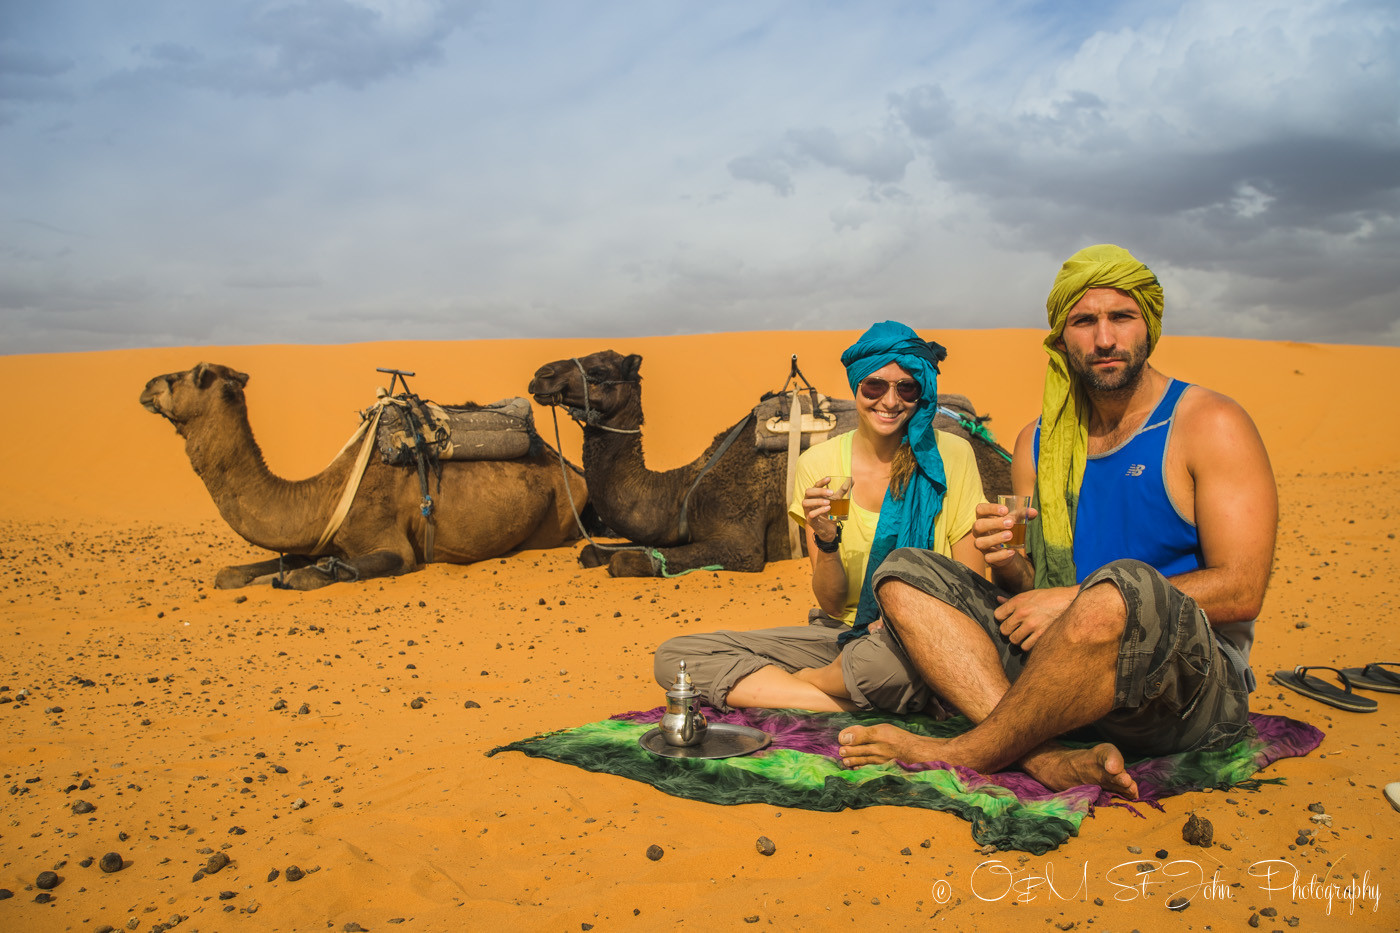 Drinking tea in the Erg Che, off the grid vacationbbi. Sahara Desert. Morocco, off the grid vacation